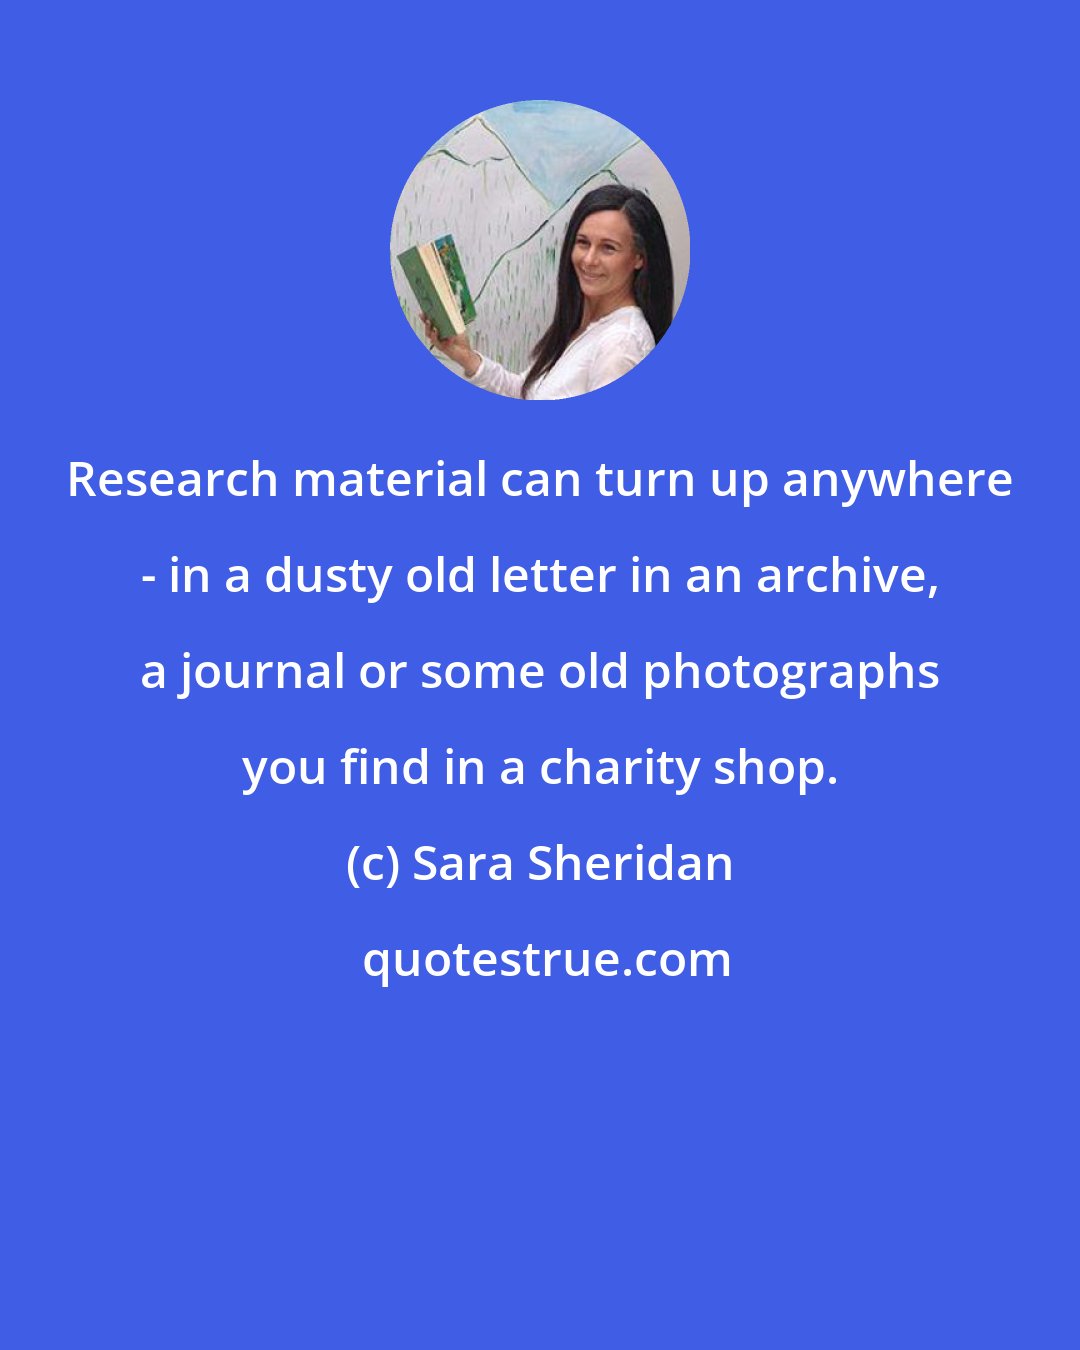 Sara Sheridan: Research material can turn up anywhere - in a dusty old letter in an archive, a journal or some old photographs you find in a charity shop.